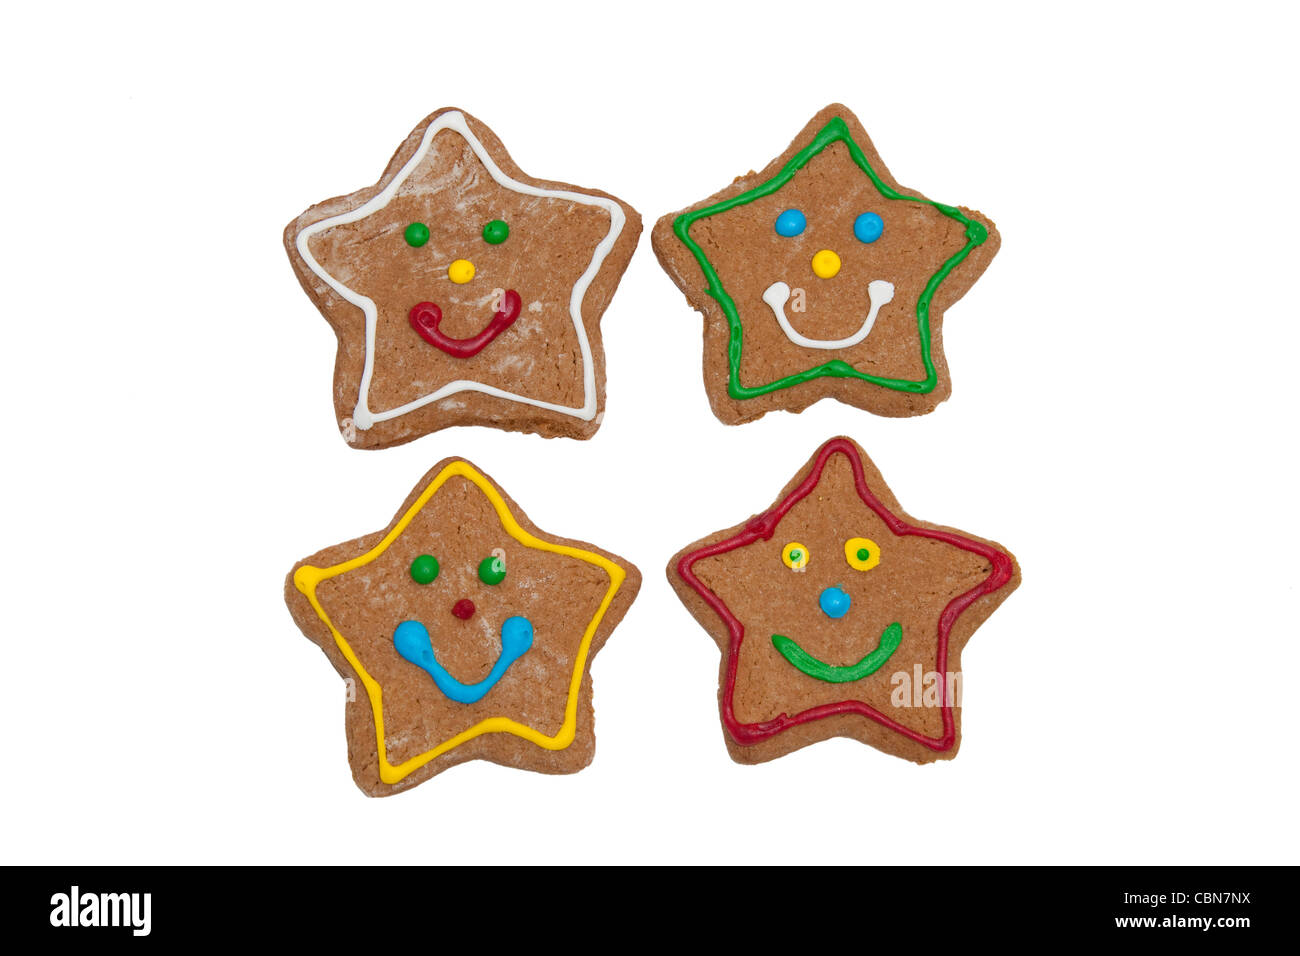 Smiling star shaped Christmas gingerbread cookies on white background Stock Photo